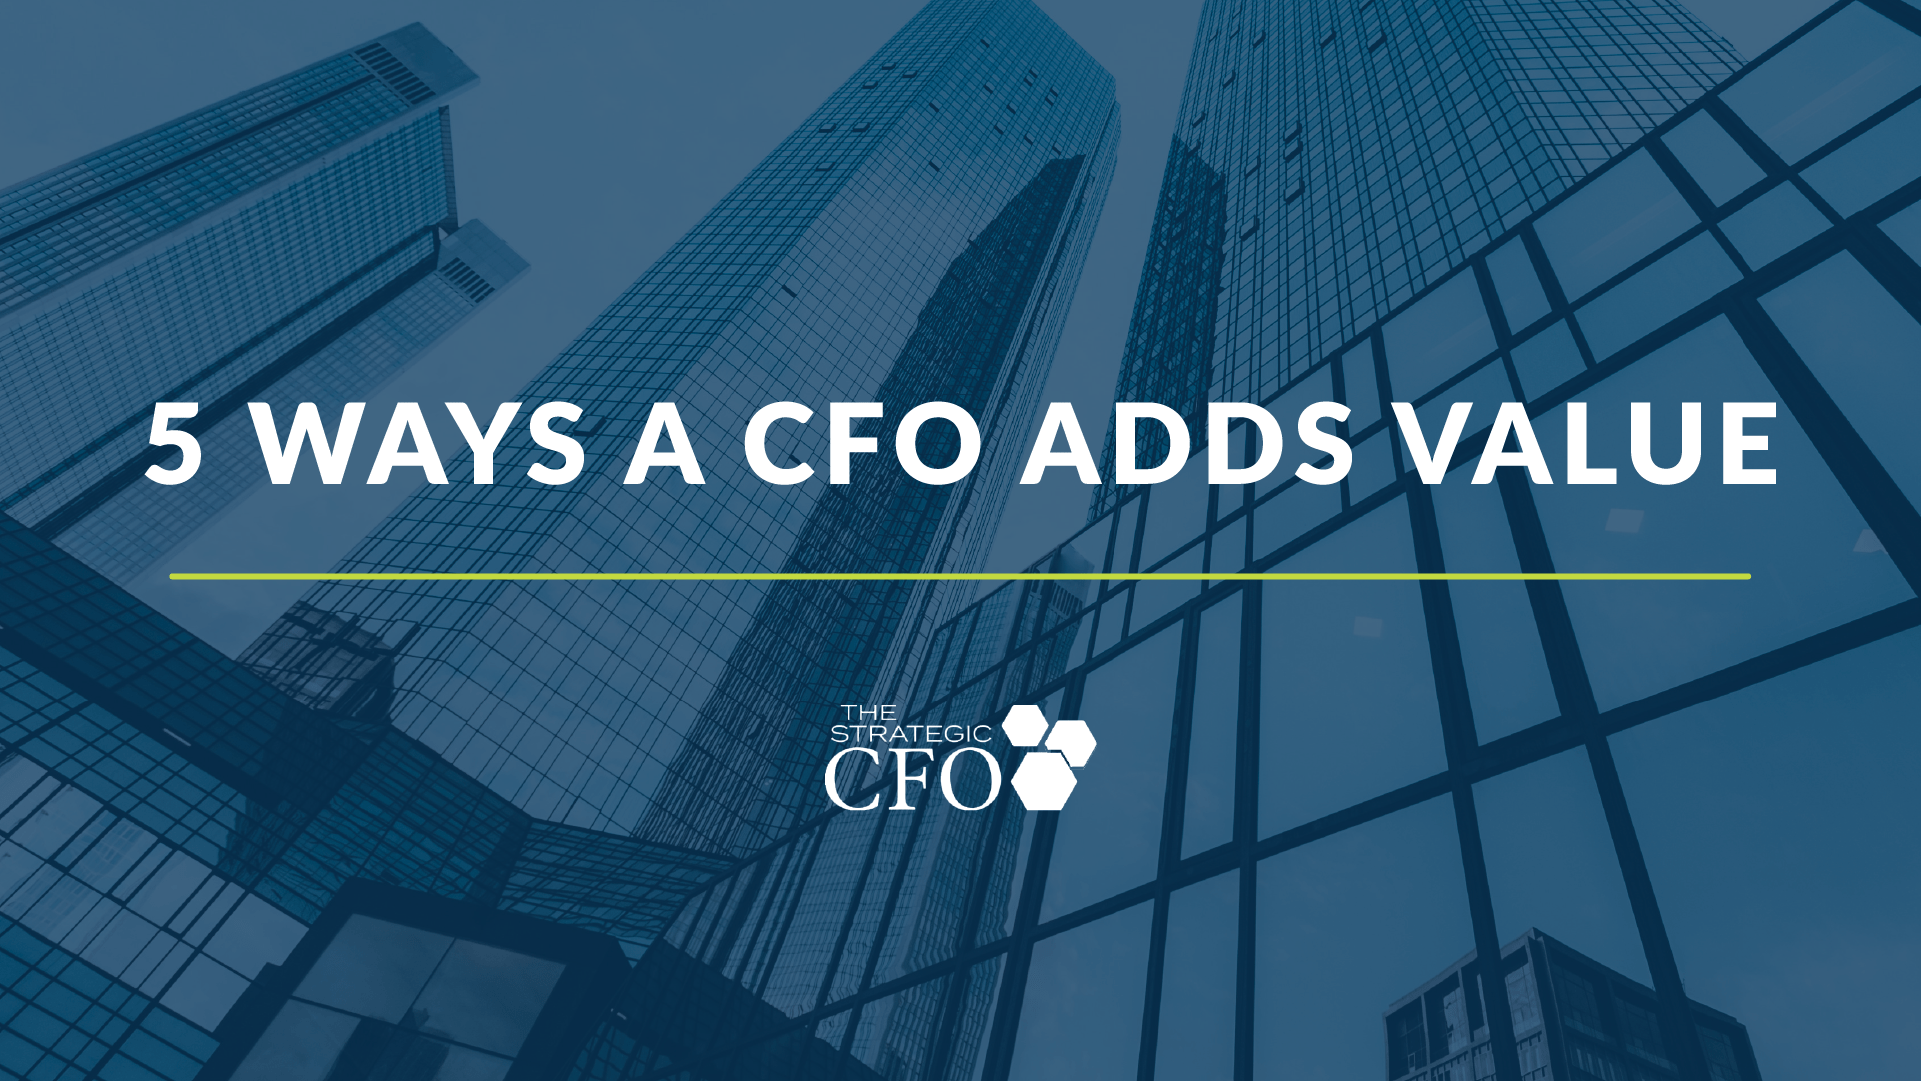 Skyscrapers and "5 Ways a CFO Adds Value" text.